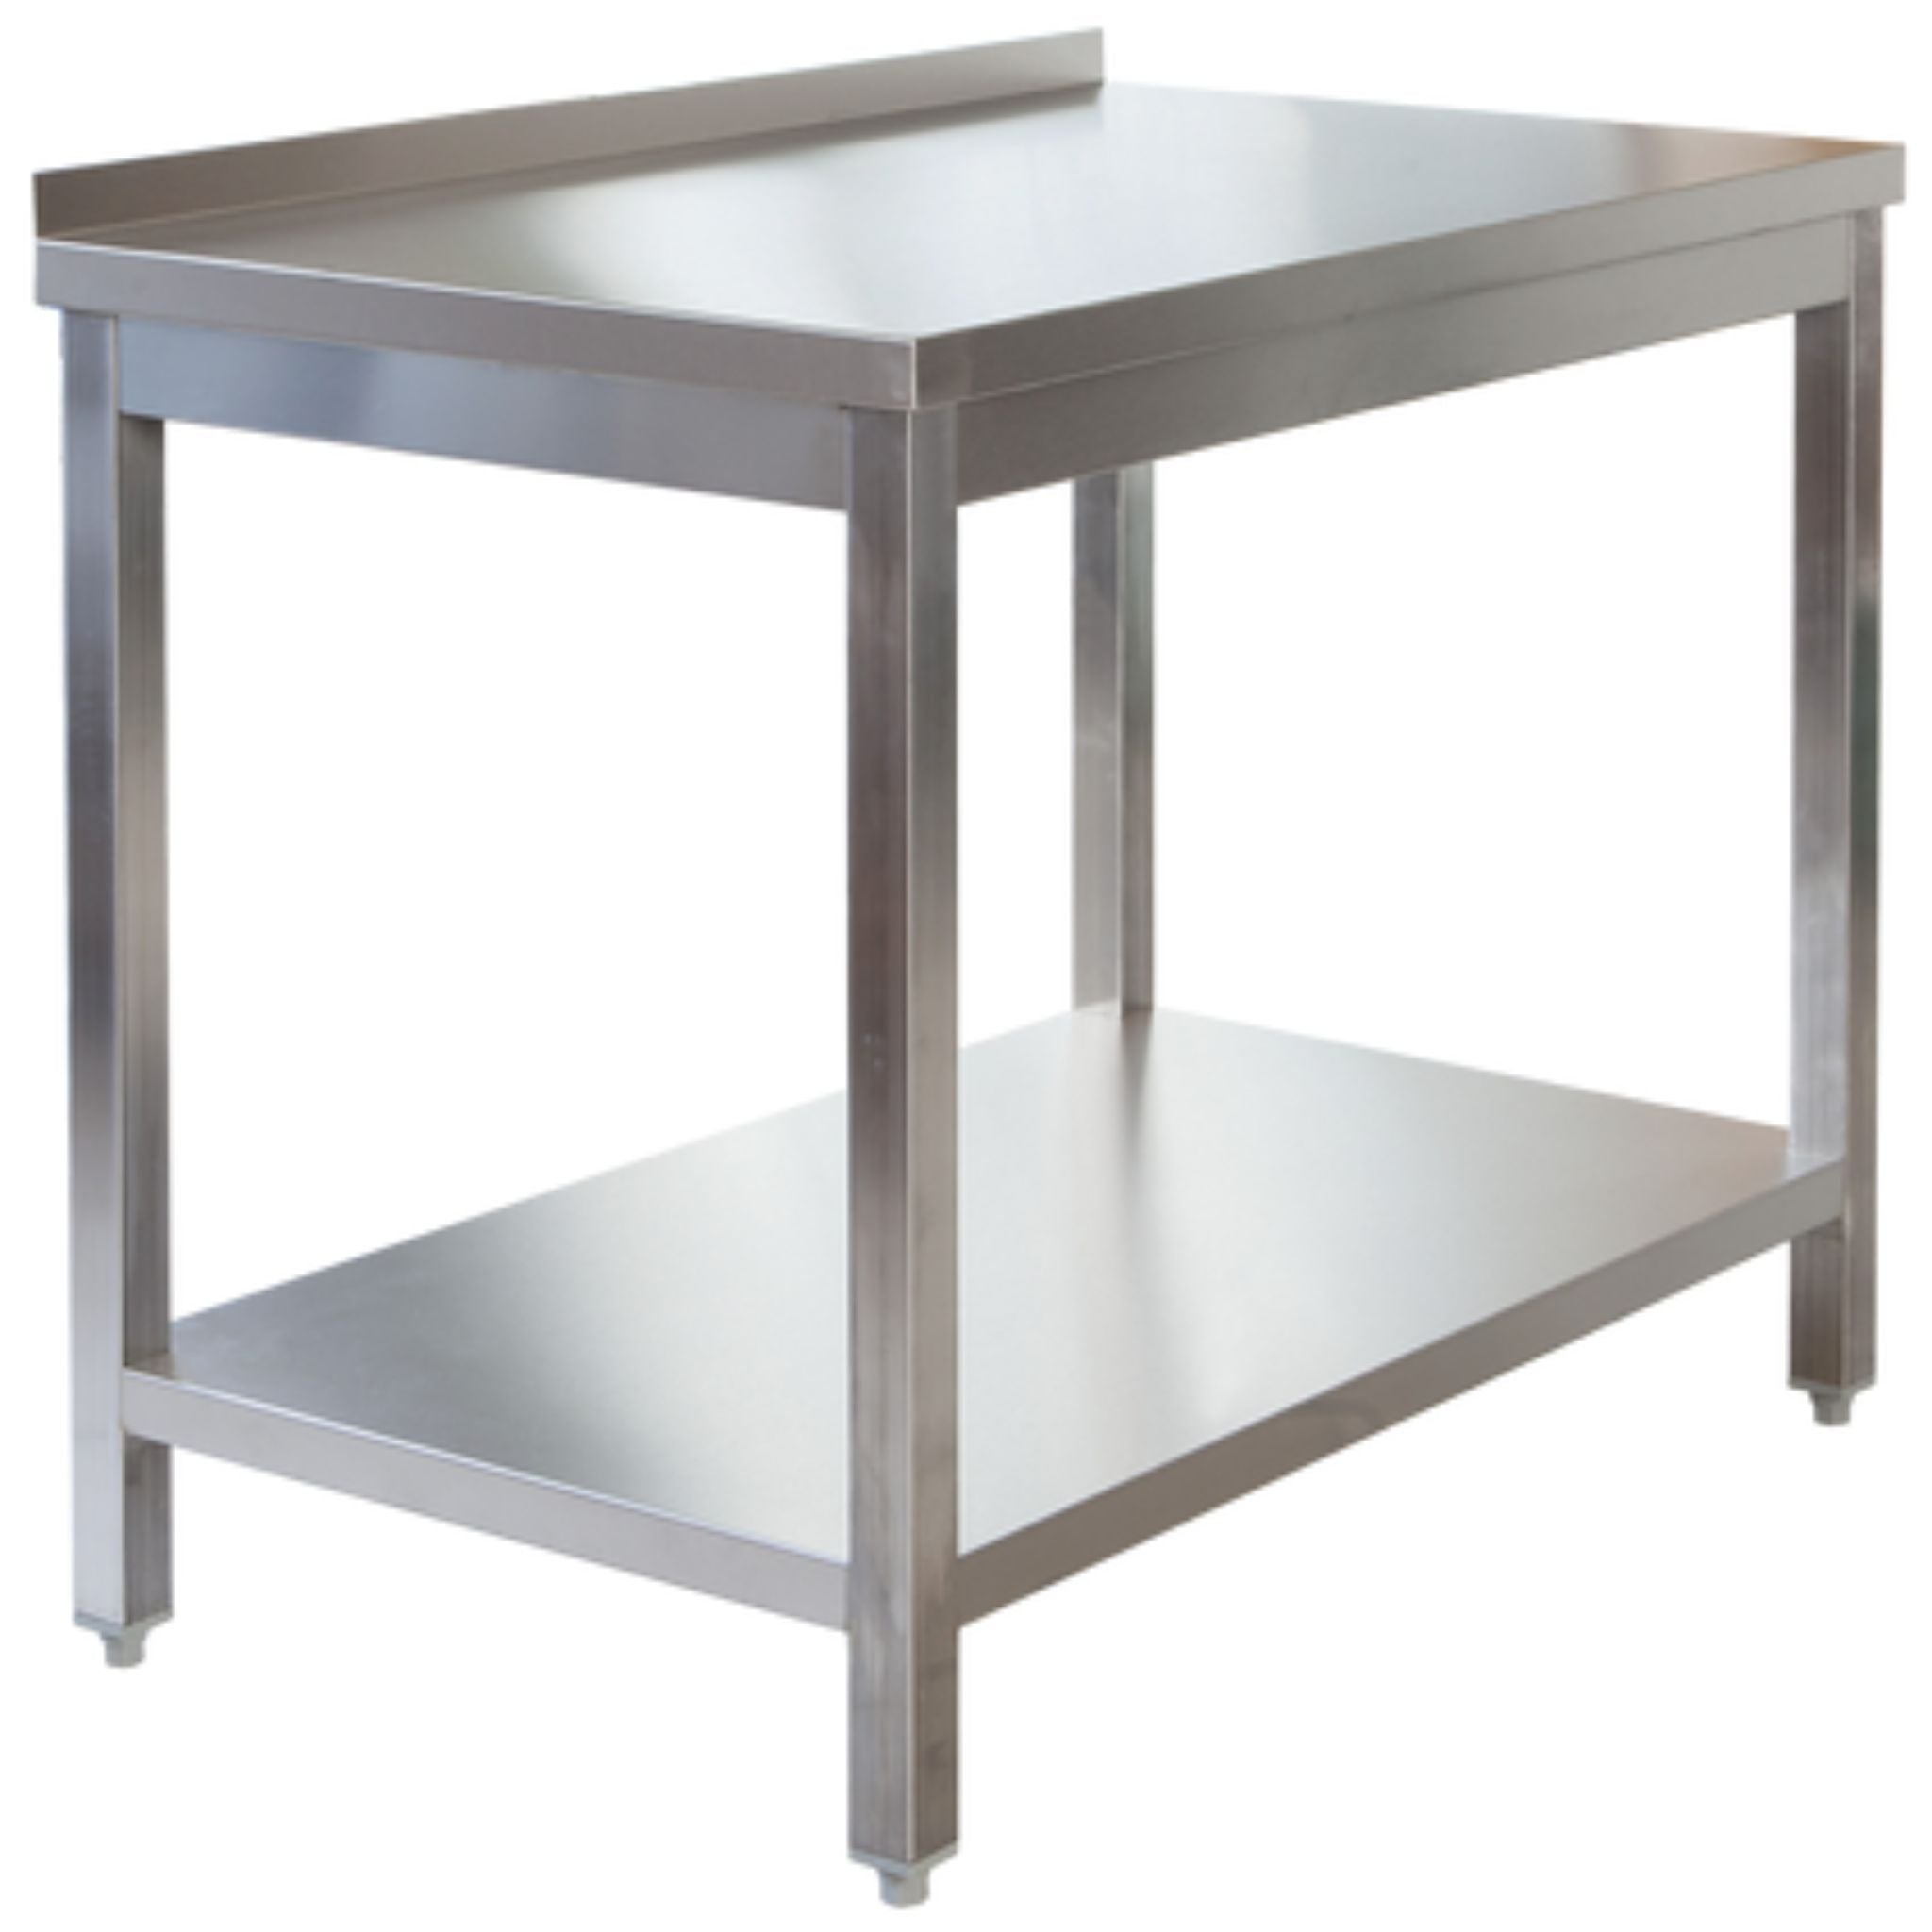 Professional stainless steel worktable with base and upstand - 0